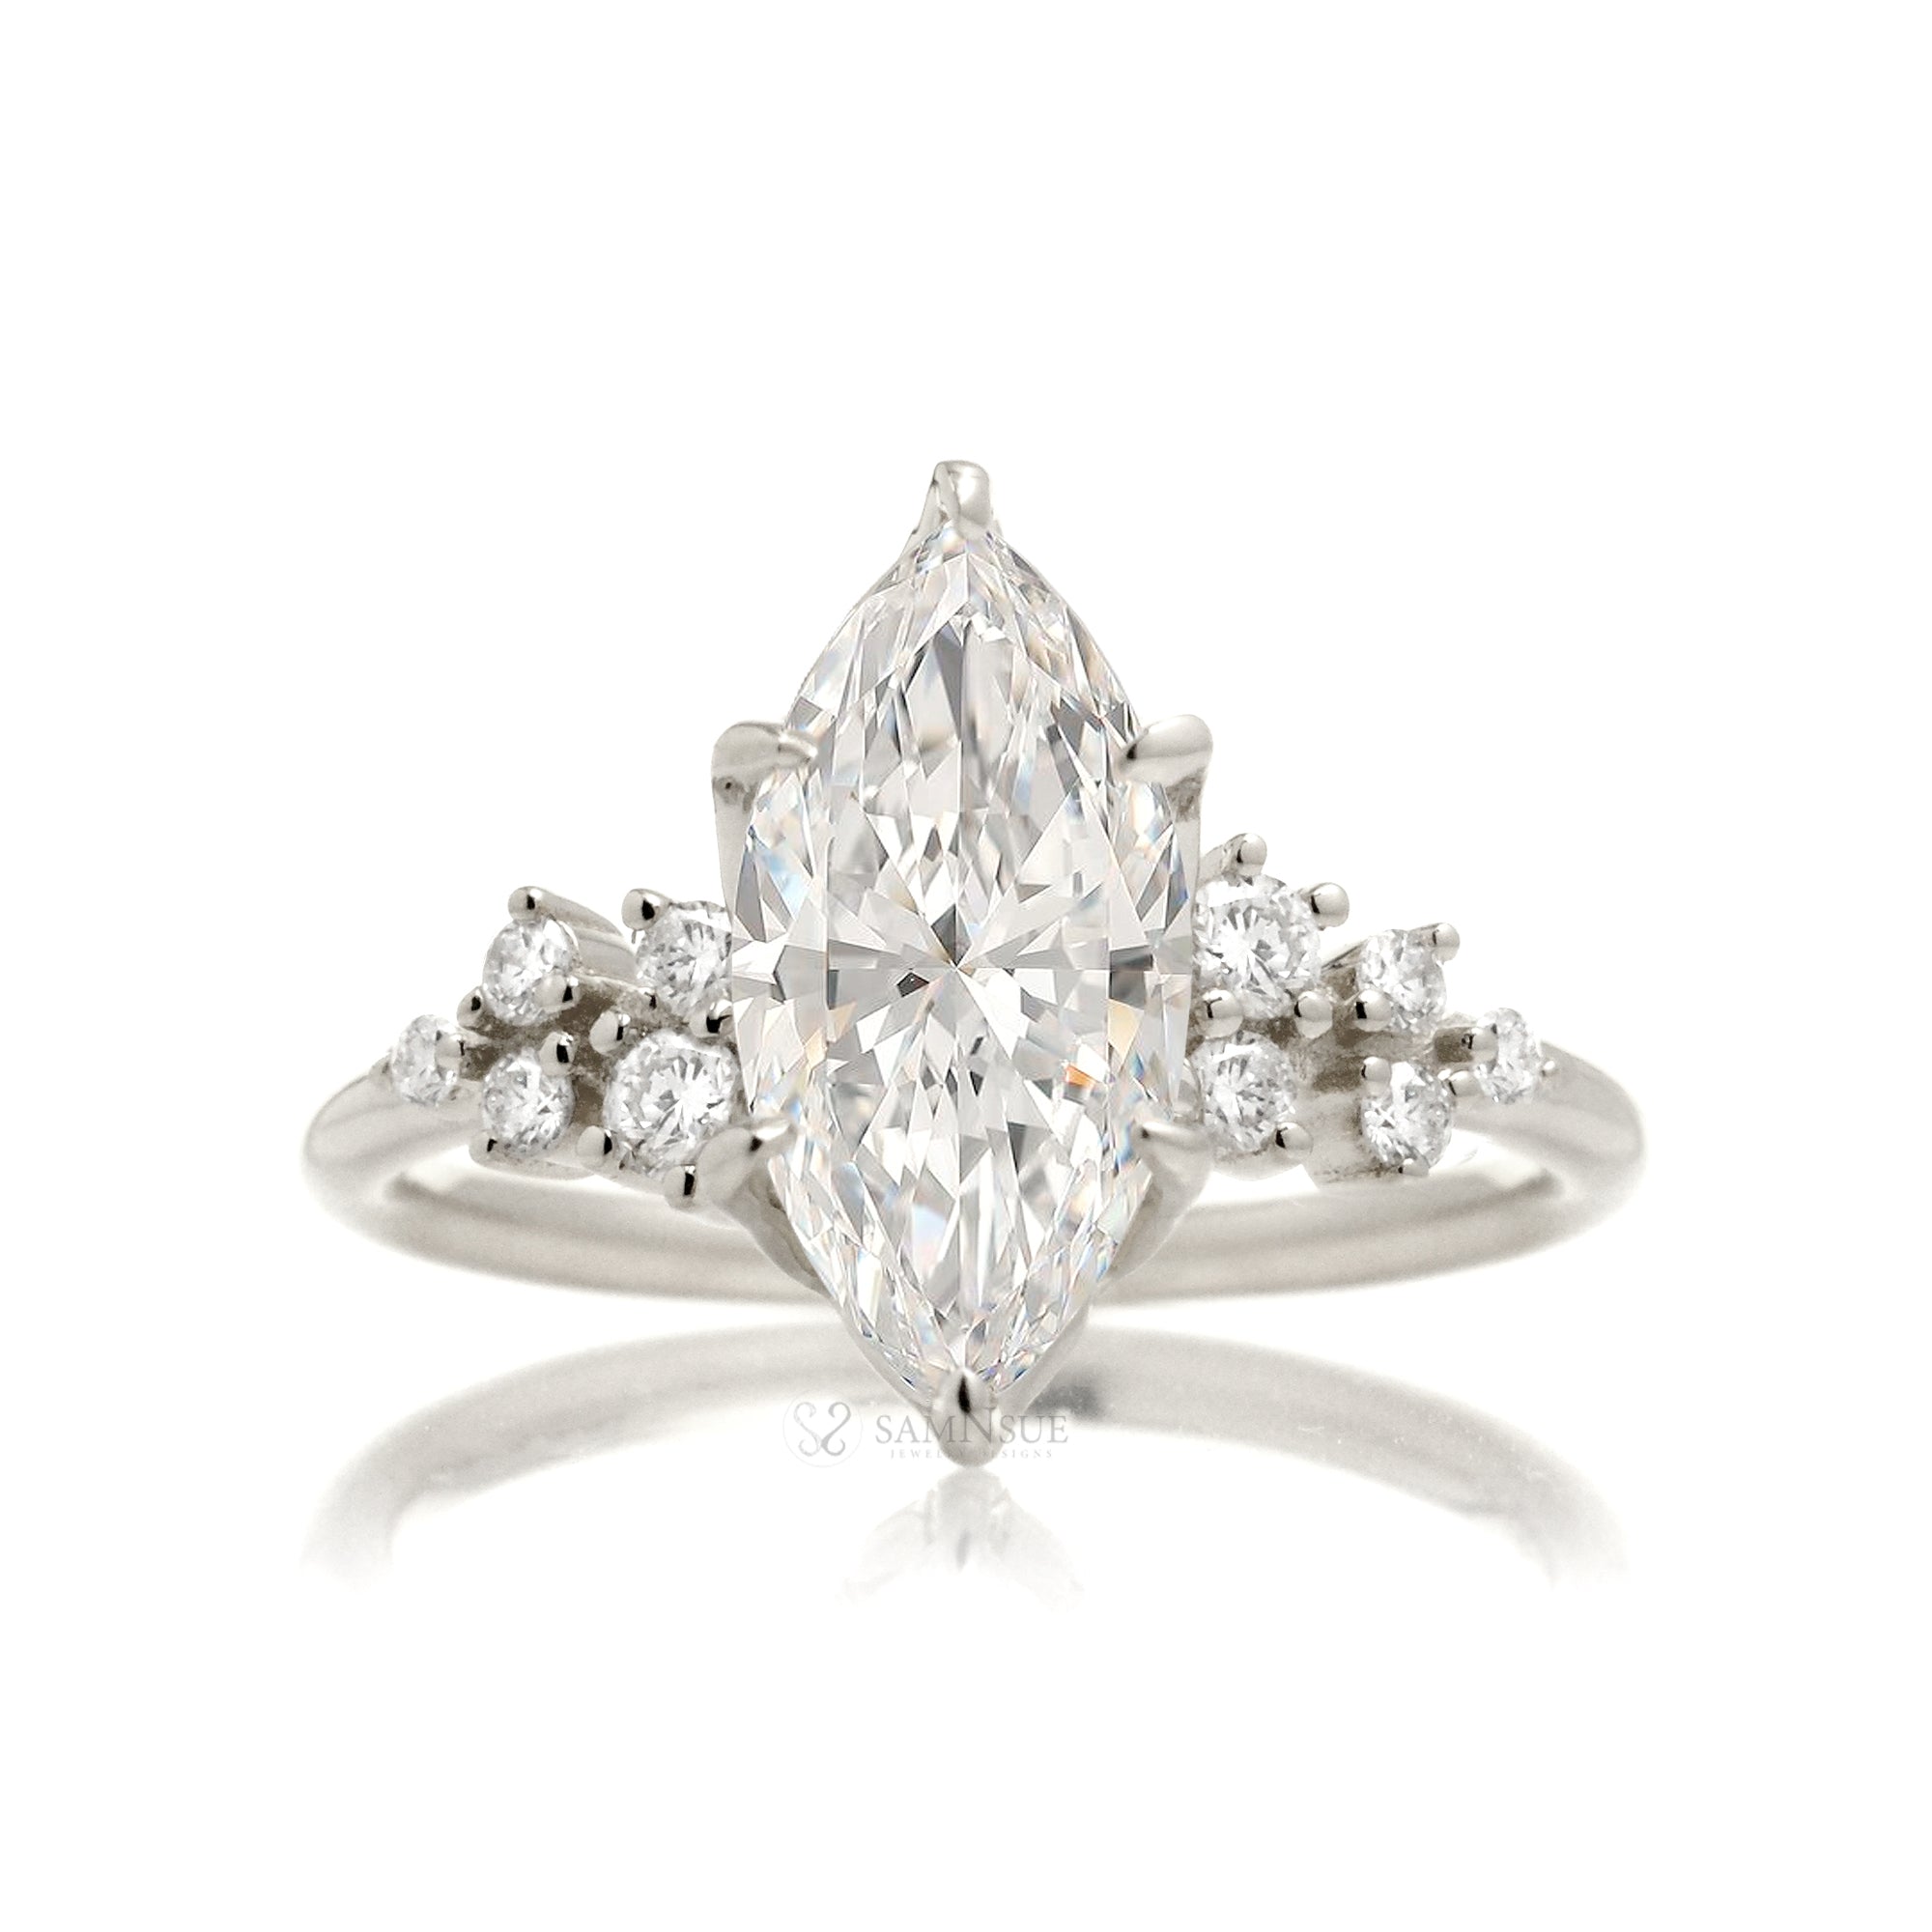 Marquise cut diamond solitaire with accent side constellation diamond in white gold